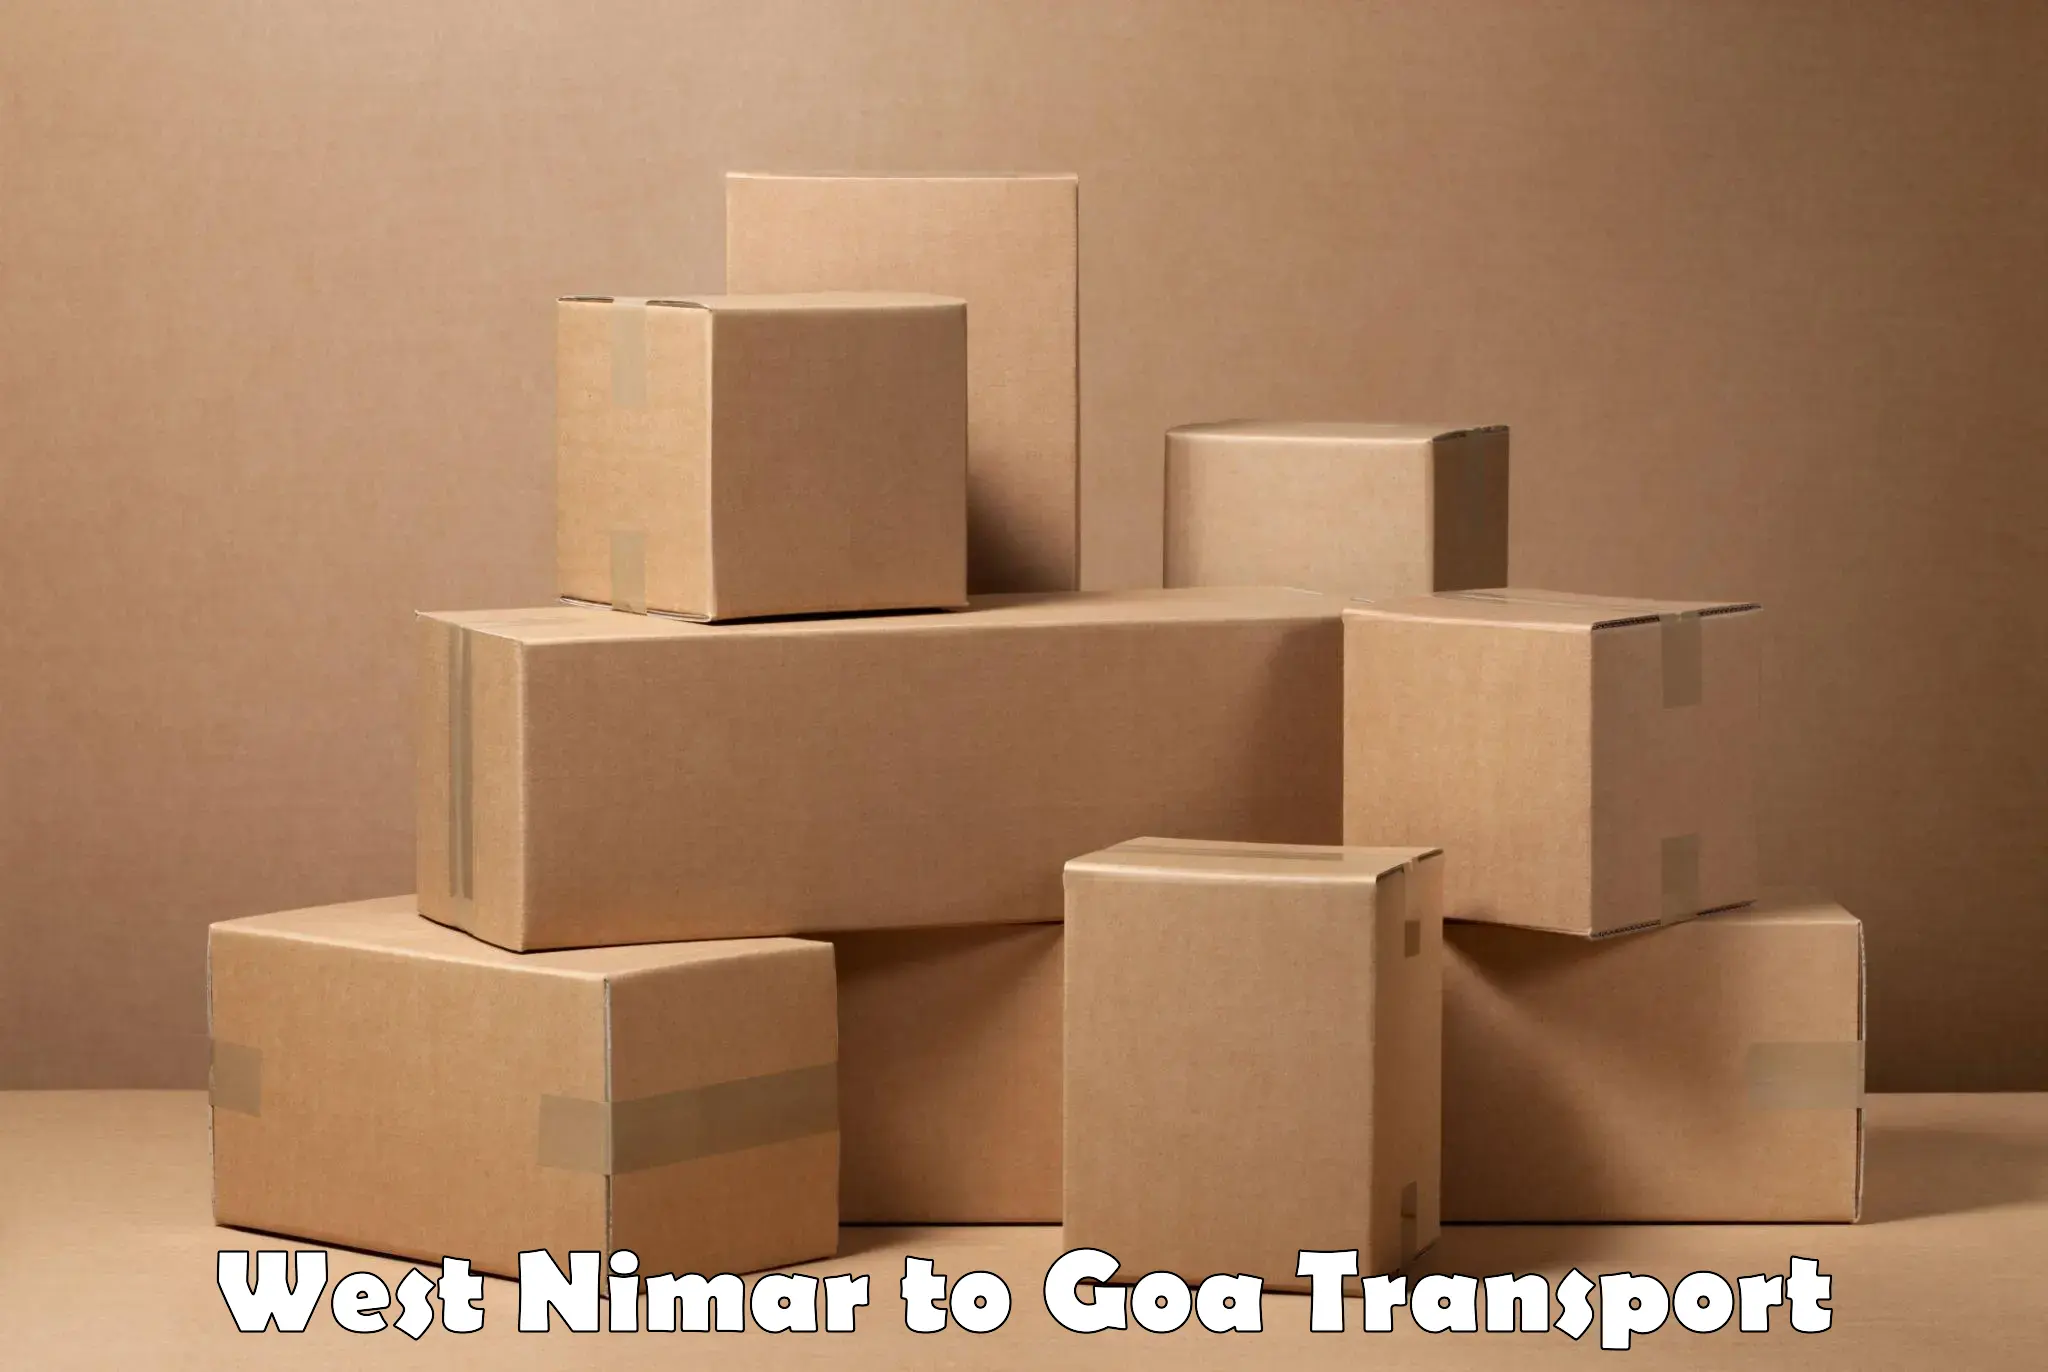 Nearby transport service West Nimar to Margao